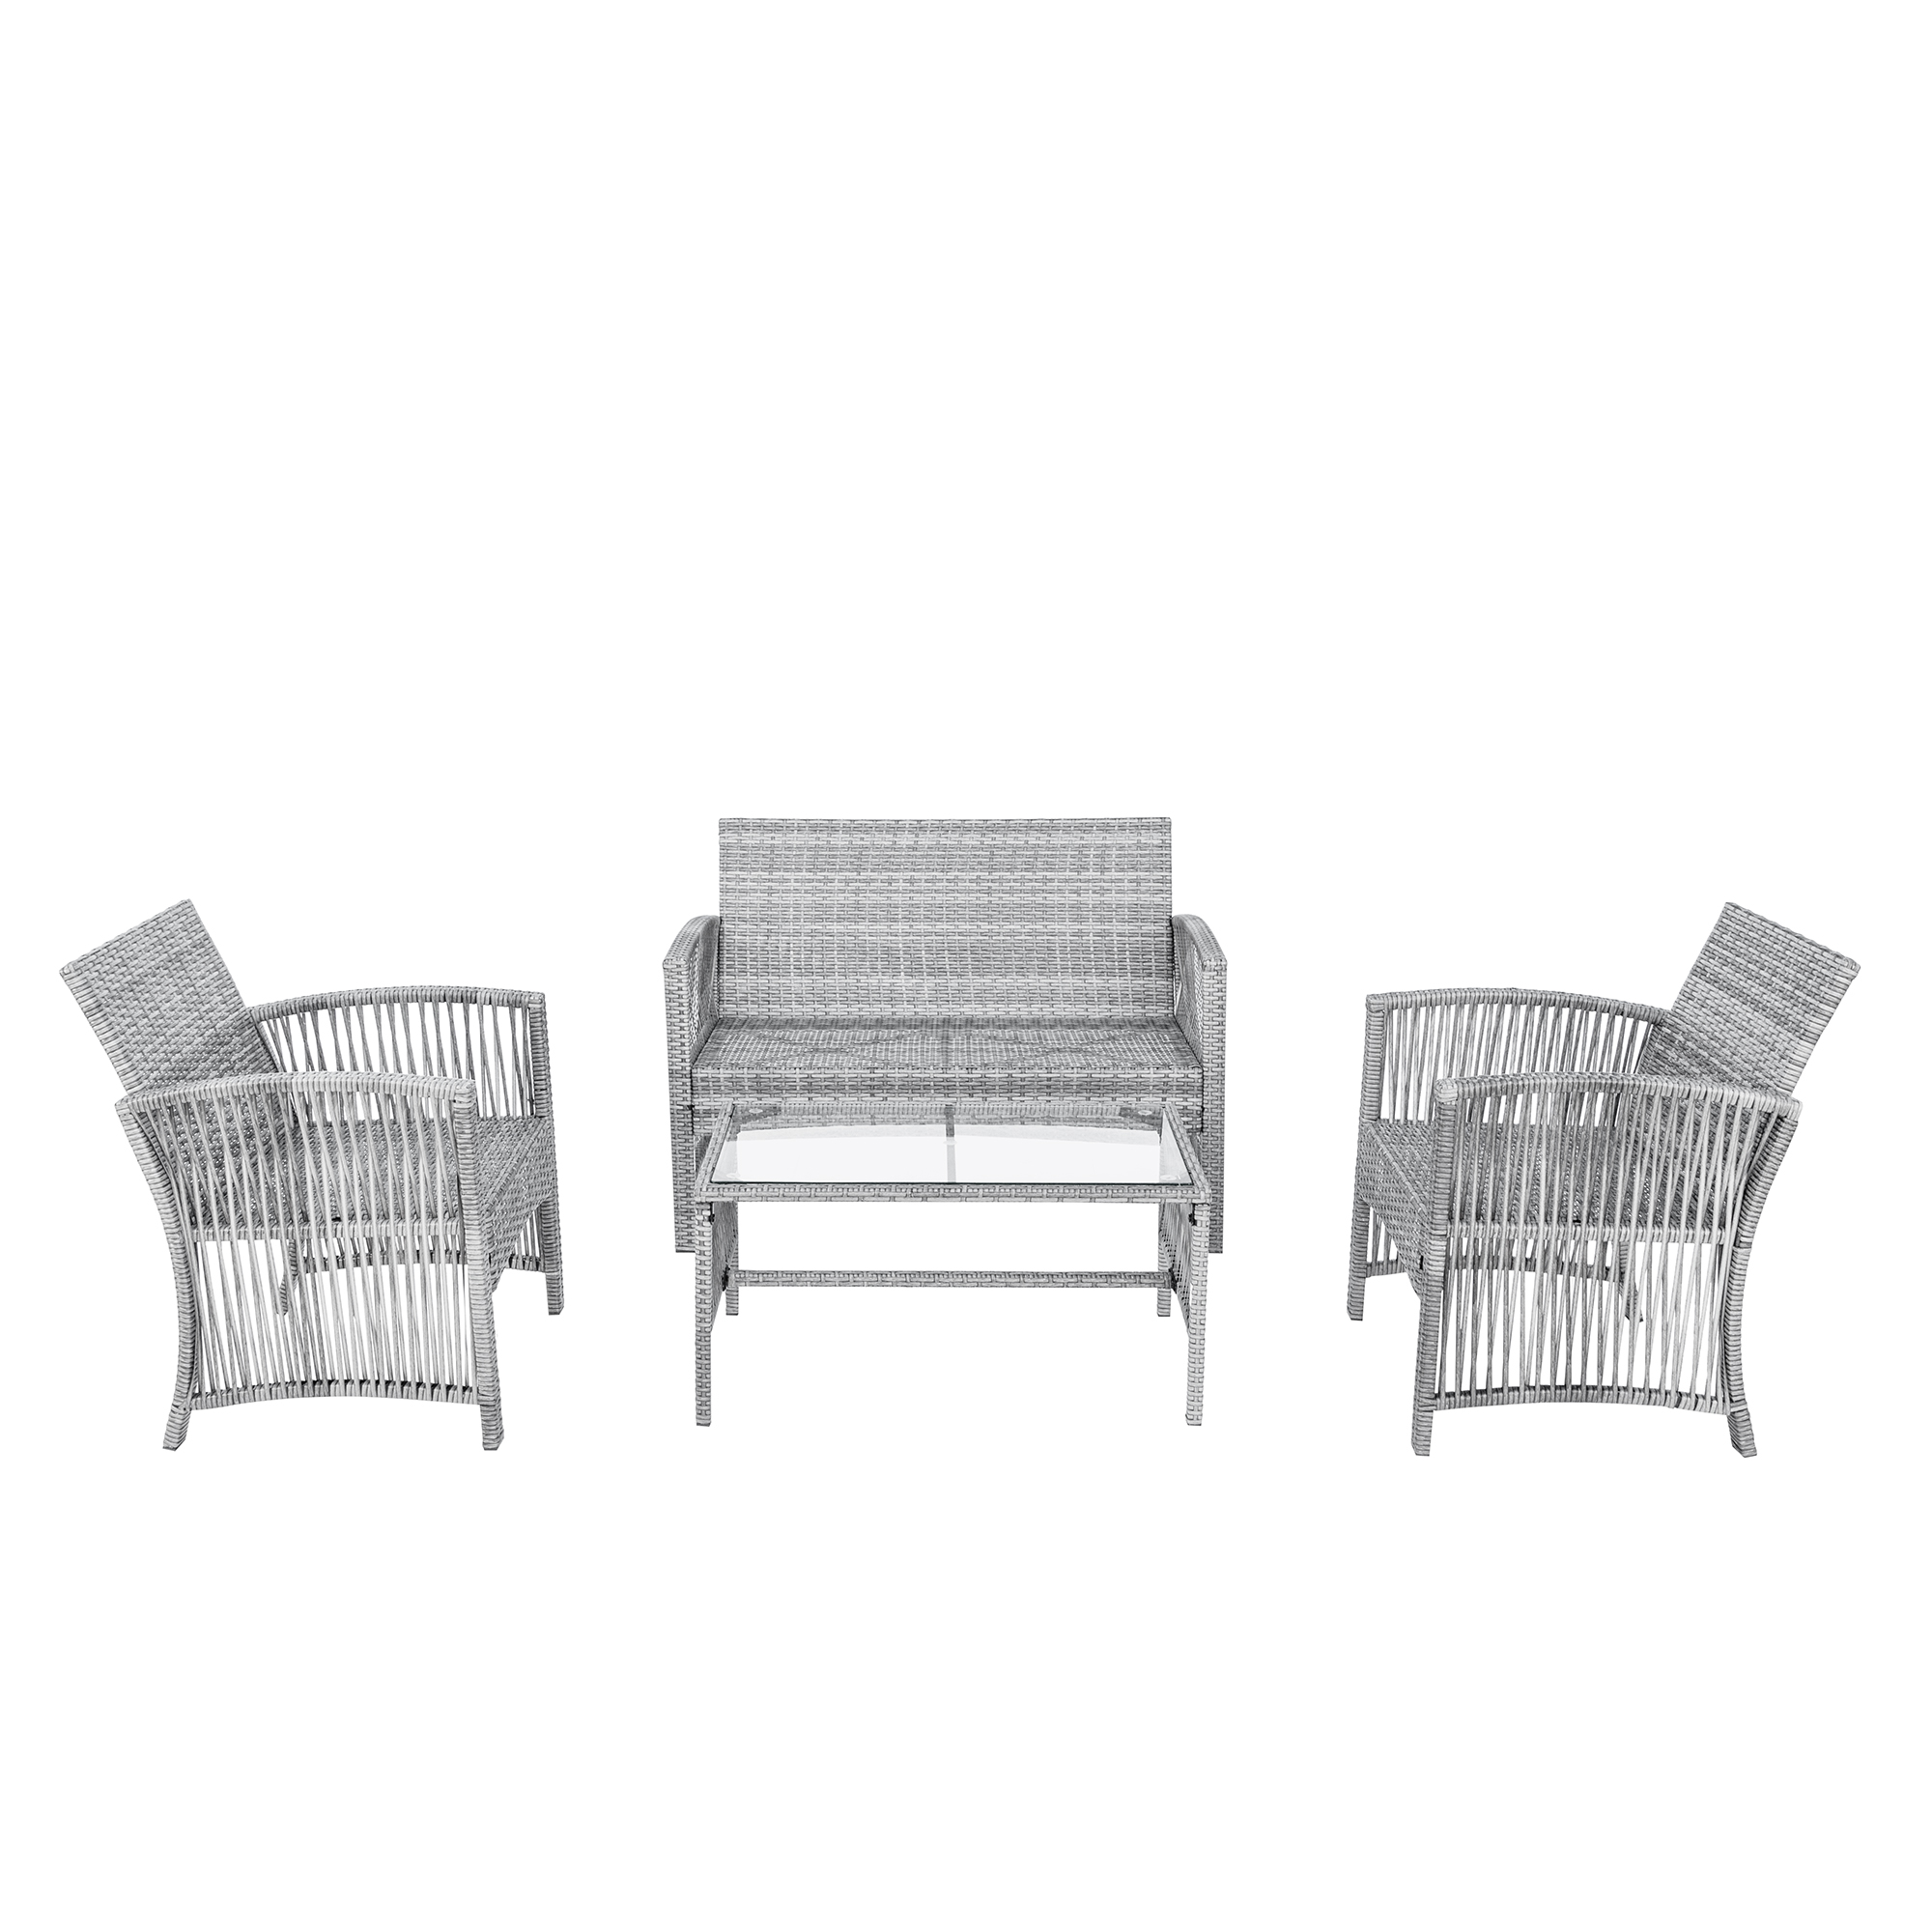 Patio Outdoor Furniture Sets, UHOMEPRO 4 Pieces PE Rattan Garden Furniture Wicker Chairs Set with Coffee Table, Outdoor Conversation Sets, Patio Dining Set for Backyard Poolside Porch, Gray, W7764 - image 5 of 11